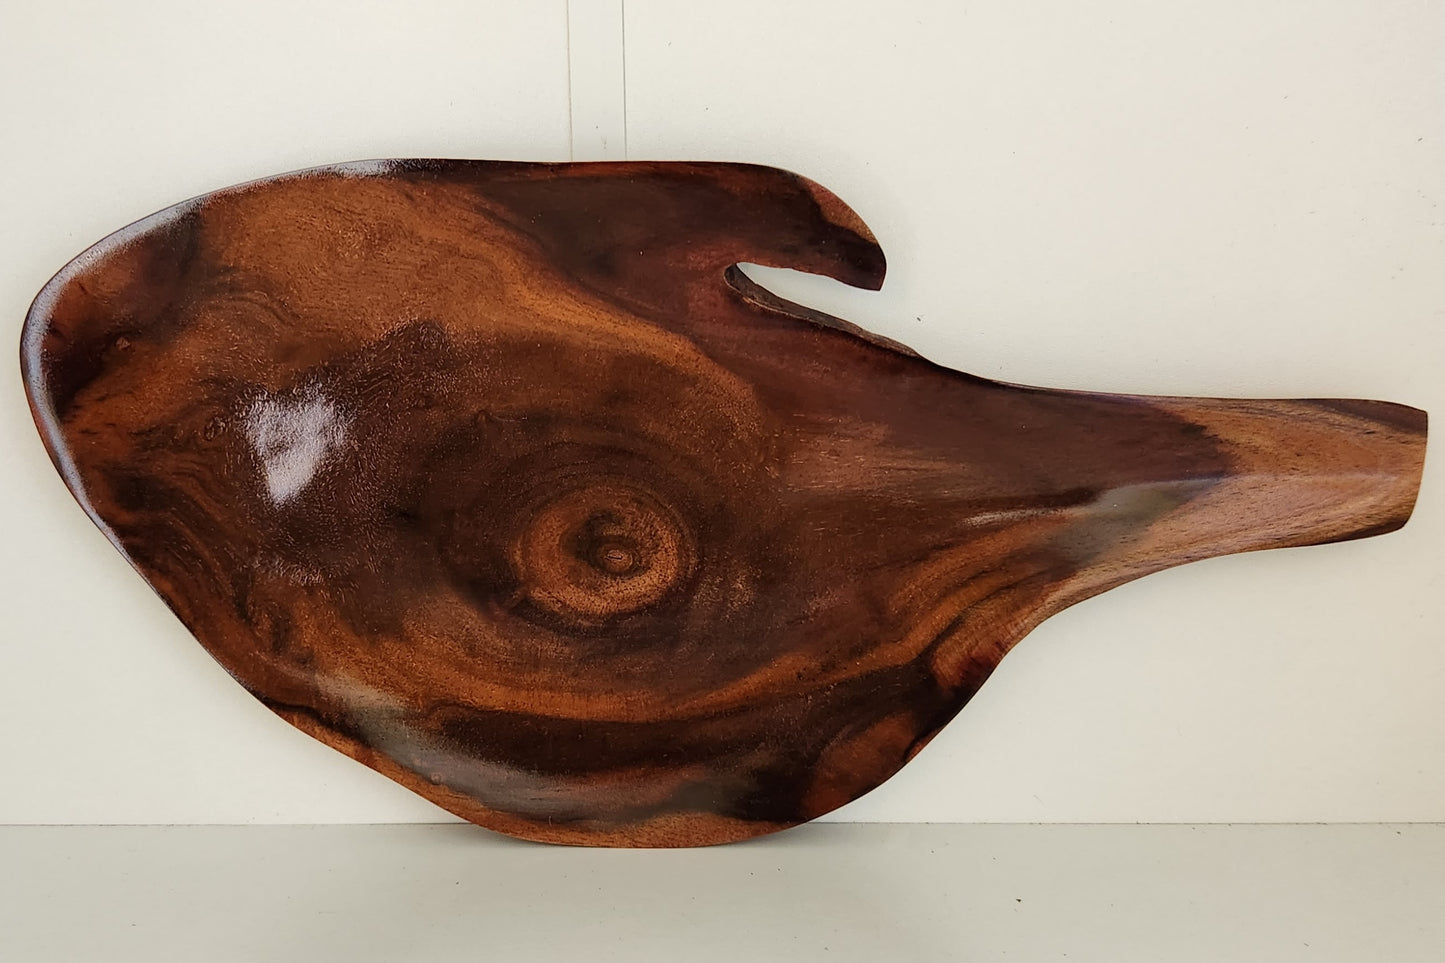 Hand Carved Serving Platter - from local Miro wood - Medium